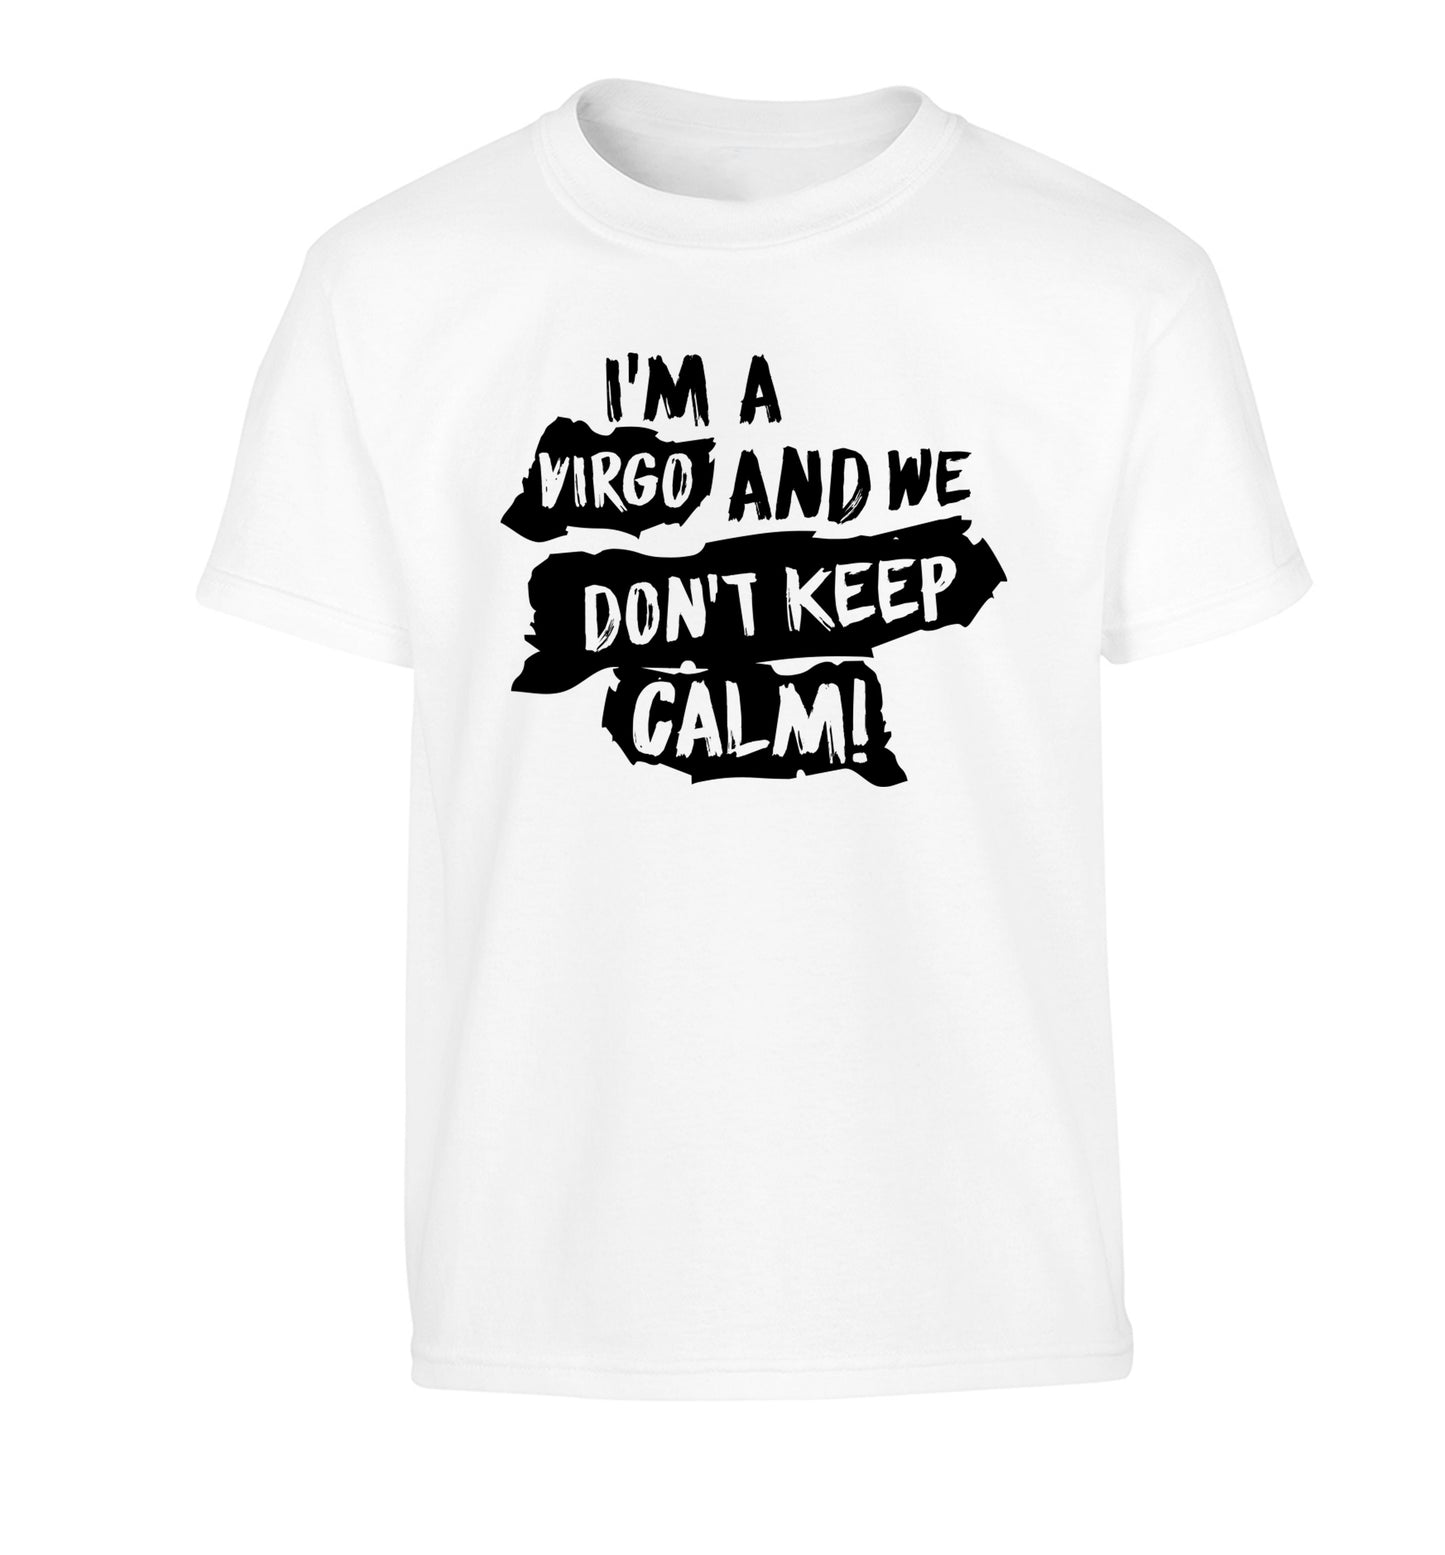 I'm a virgo and we don't keep calm Children's white Tshirt 12-13 Years